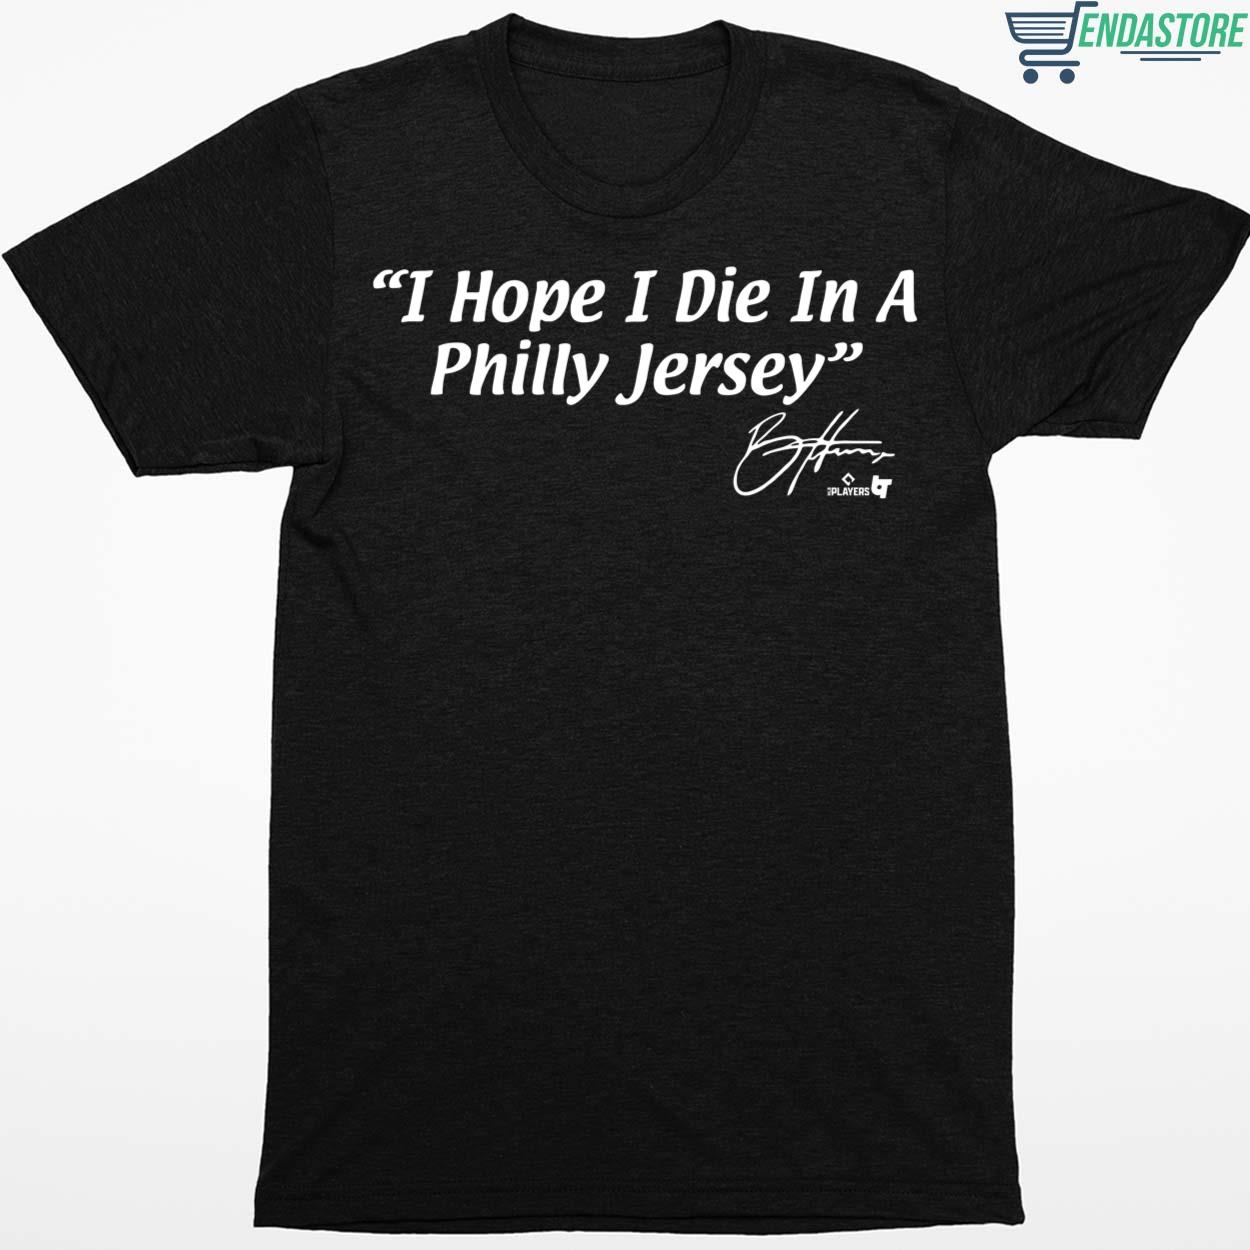 Endastore Bryce Harper I Hope I Die in A Philly Jersey Shirt